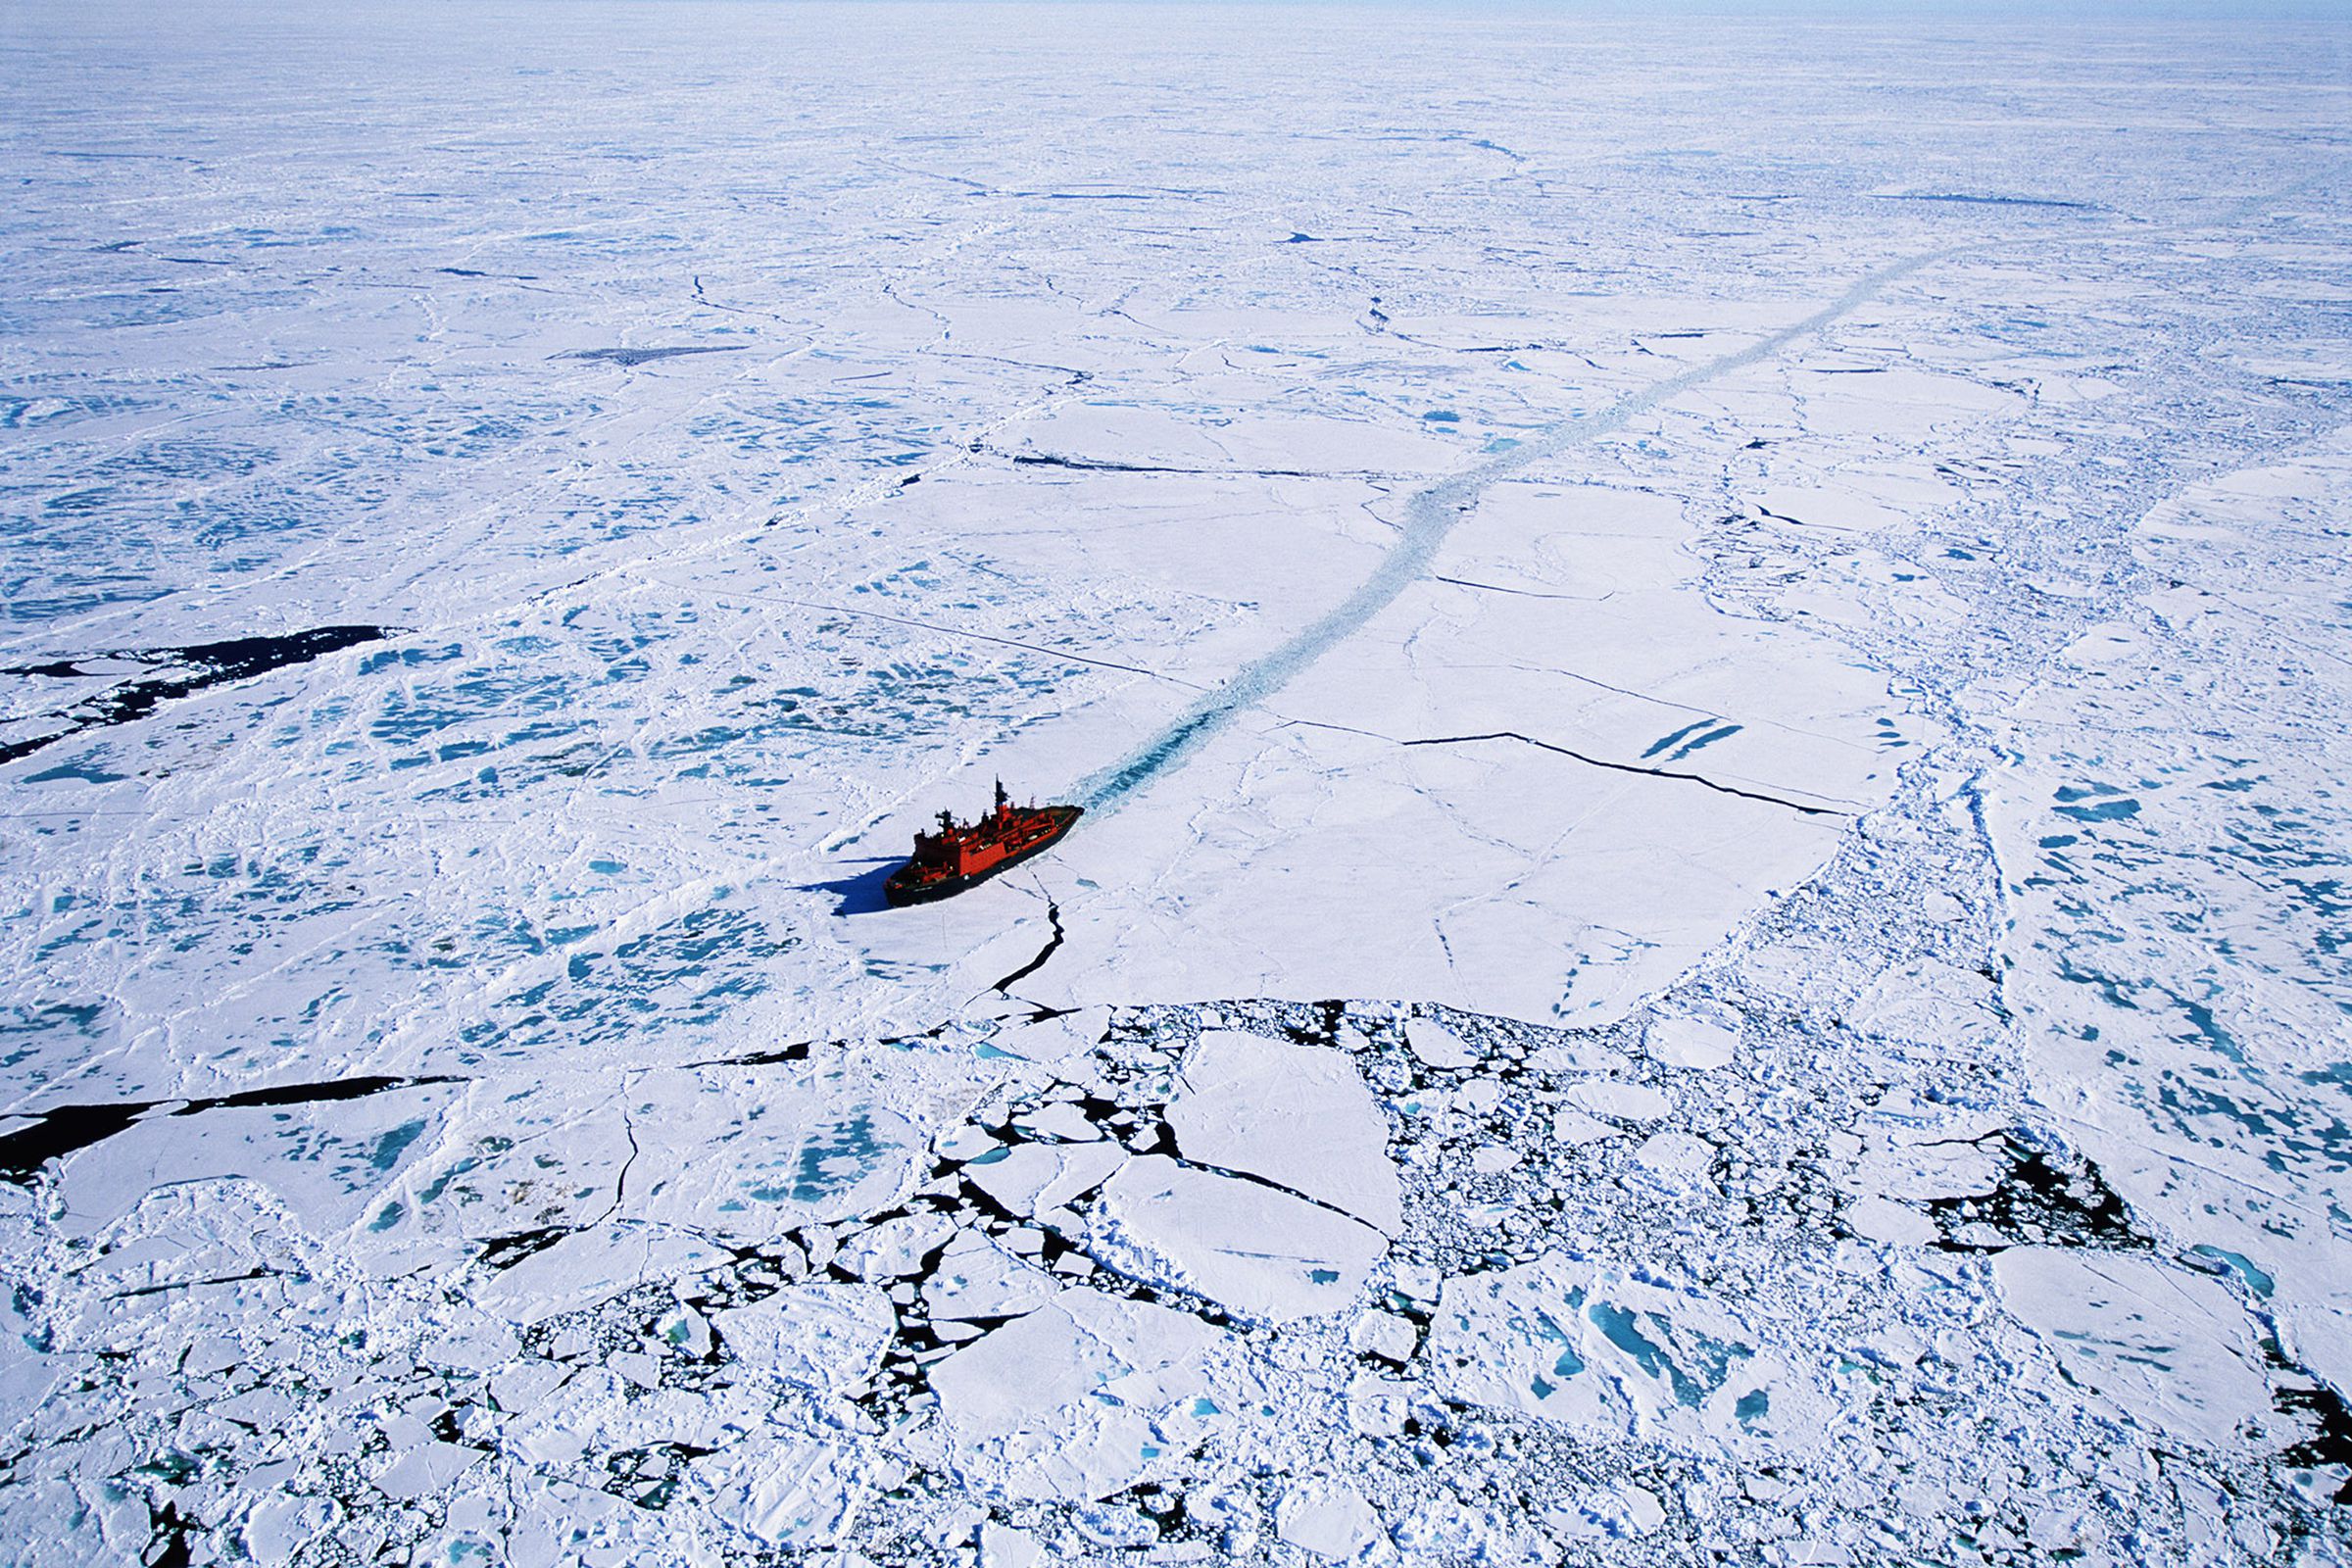 An aerial view of a Russian nuclear icebreaker clearing a path in ice to North Pole